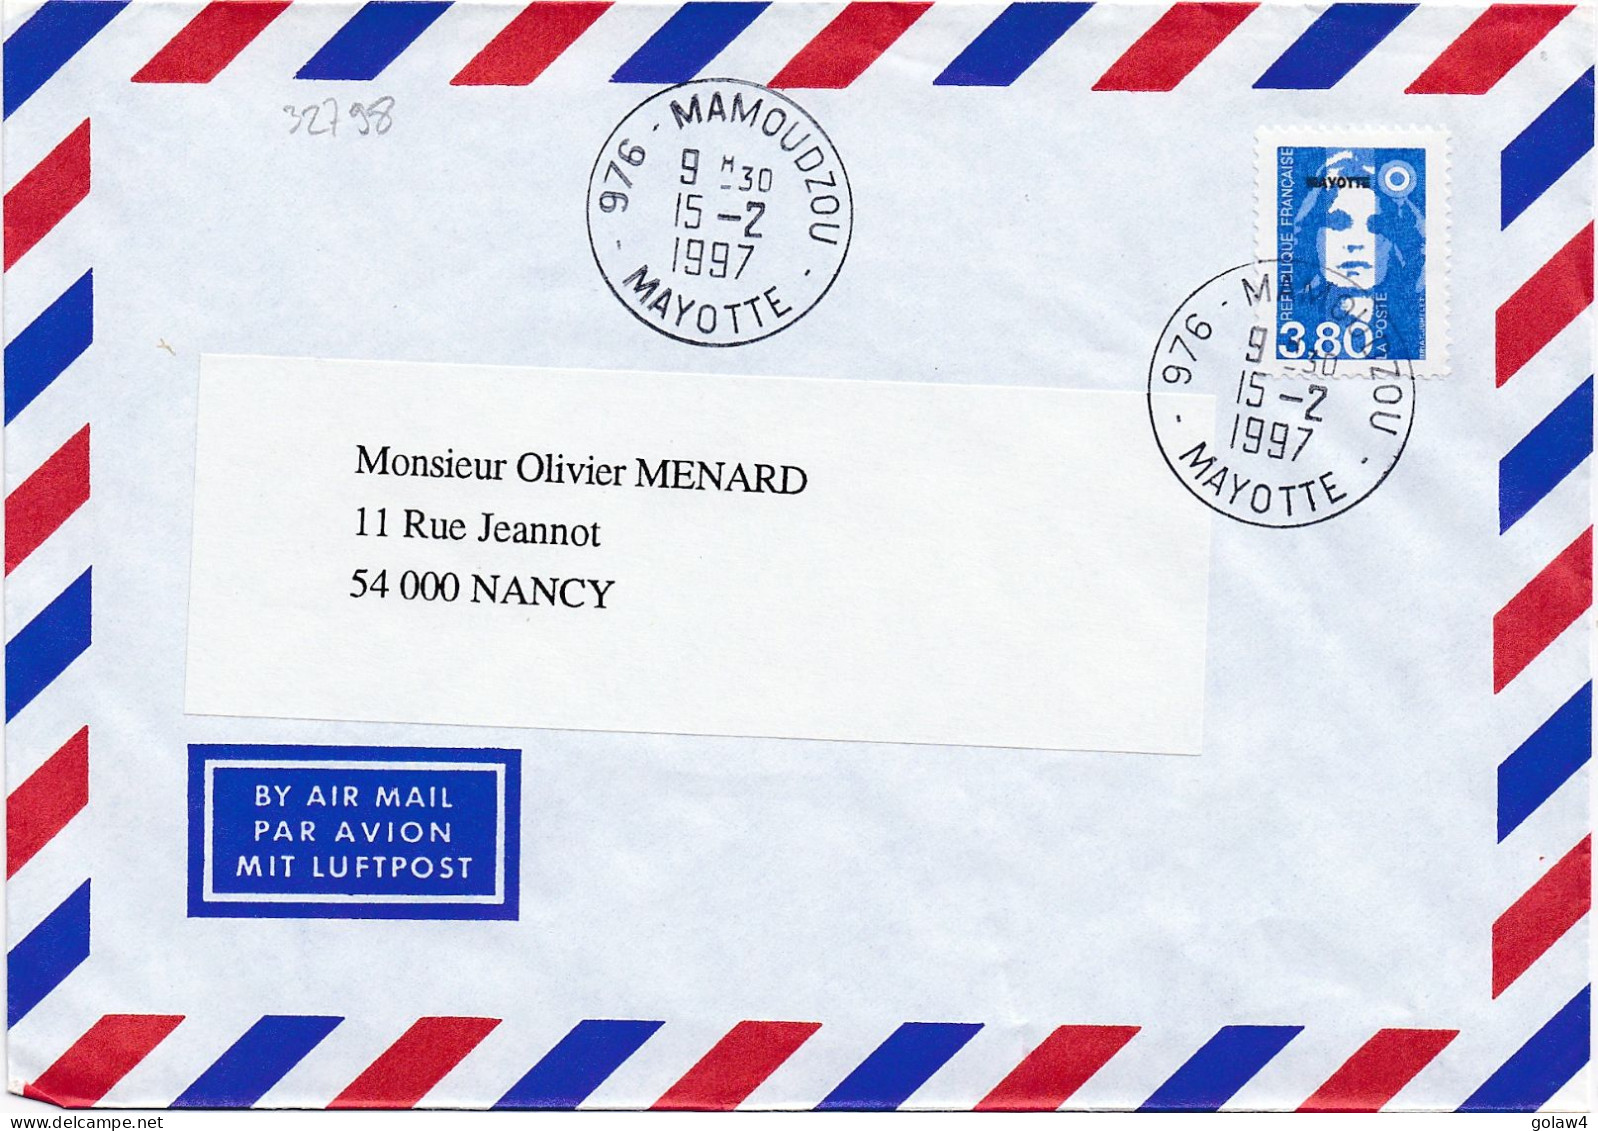 32798# MARIANNE BRIAD 3,80 LETTRE Obl 976 MAMOUDZOU MAYOTTE 1997 NANCY MEURTHE MOSELLE - Lettres & Documents